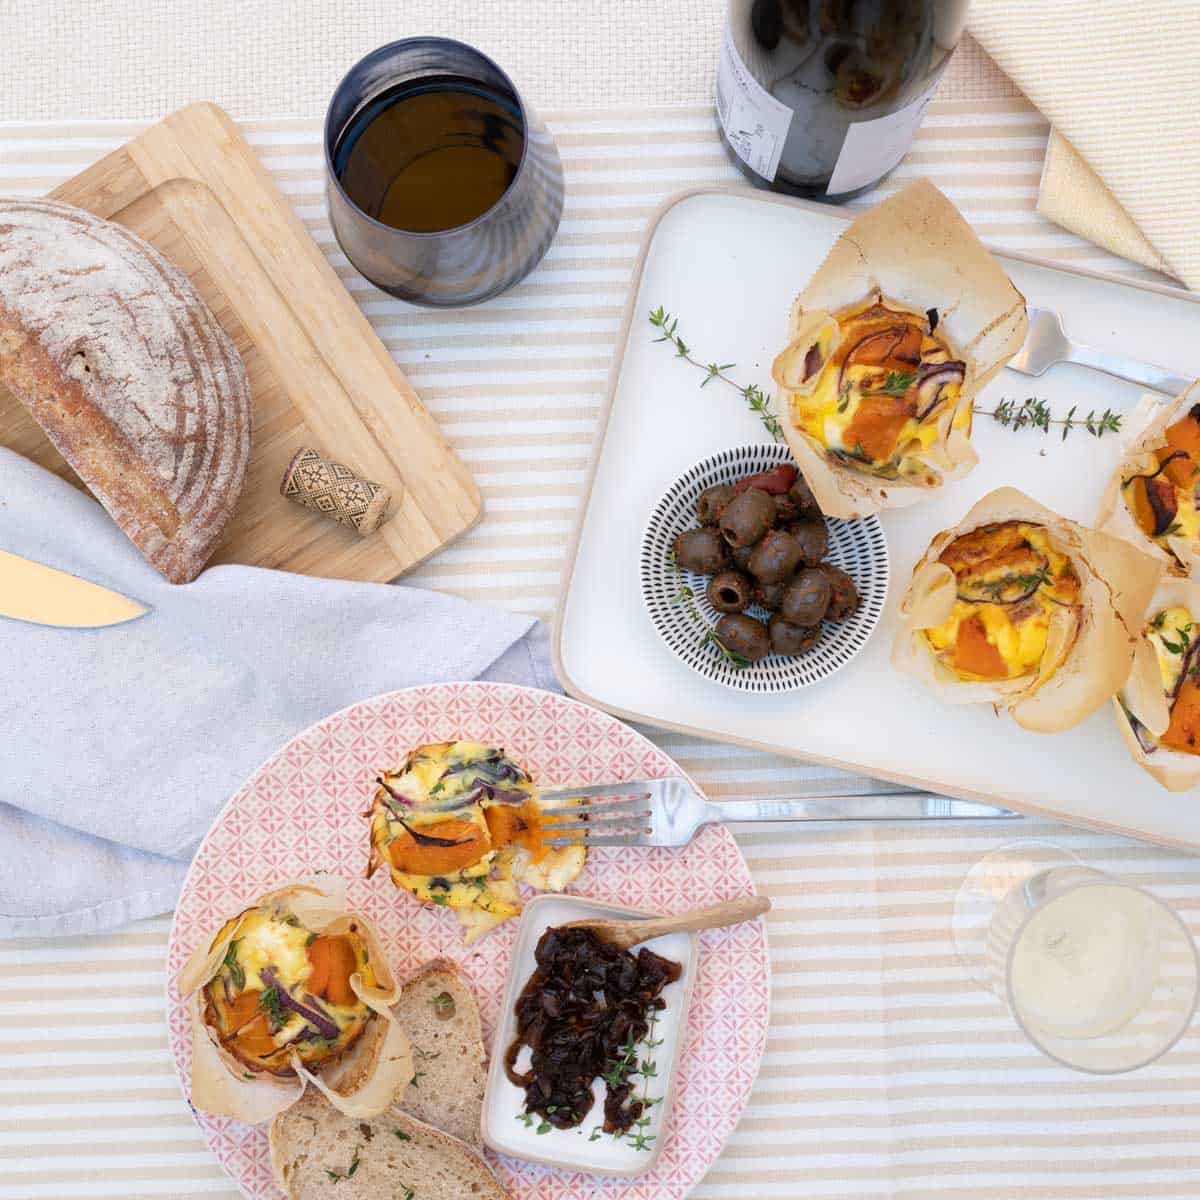 pumpkin frittata's on a striped tablecloth with assorted picnic food and wine.